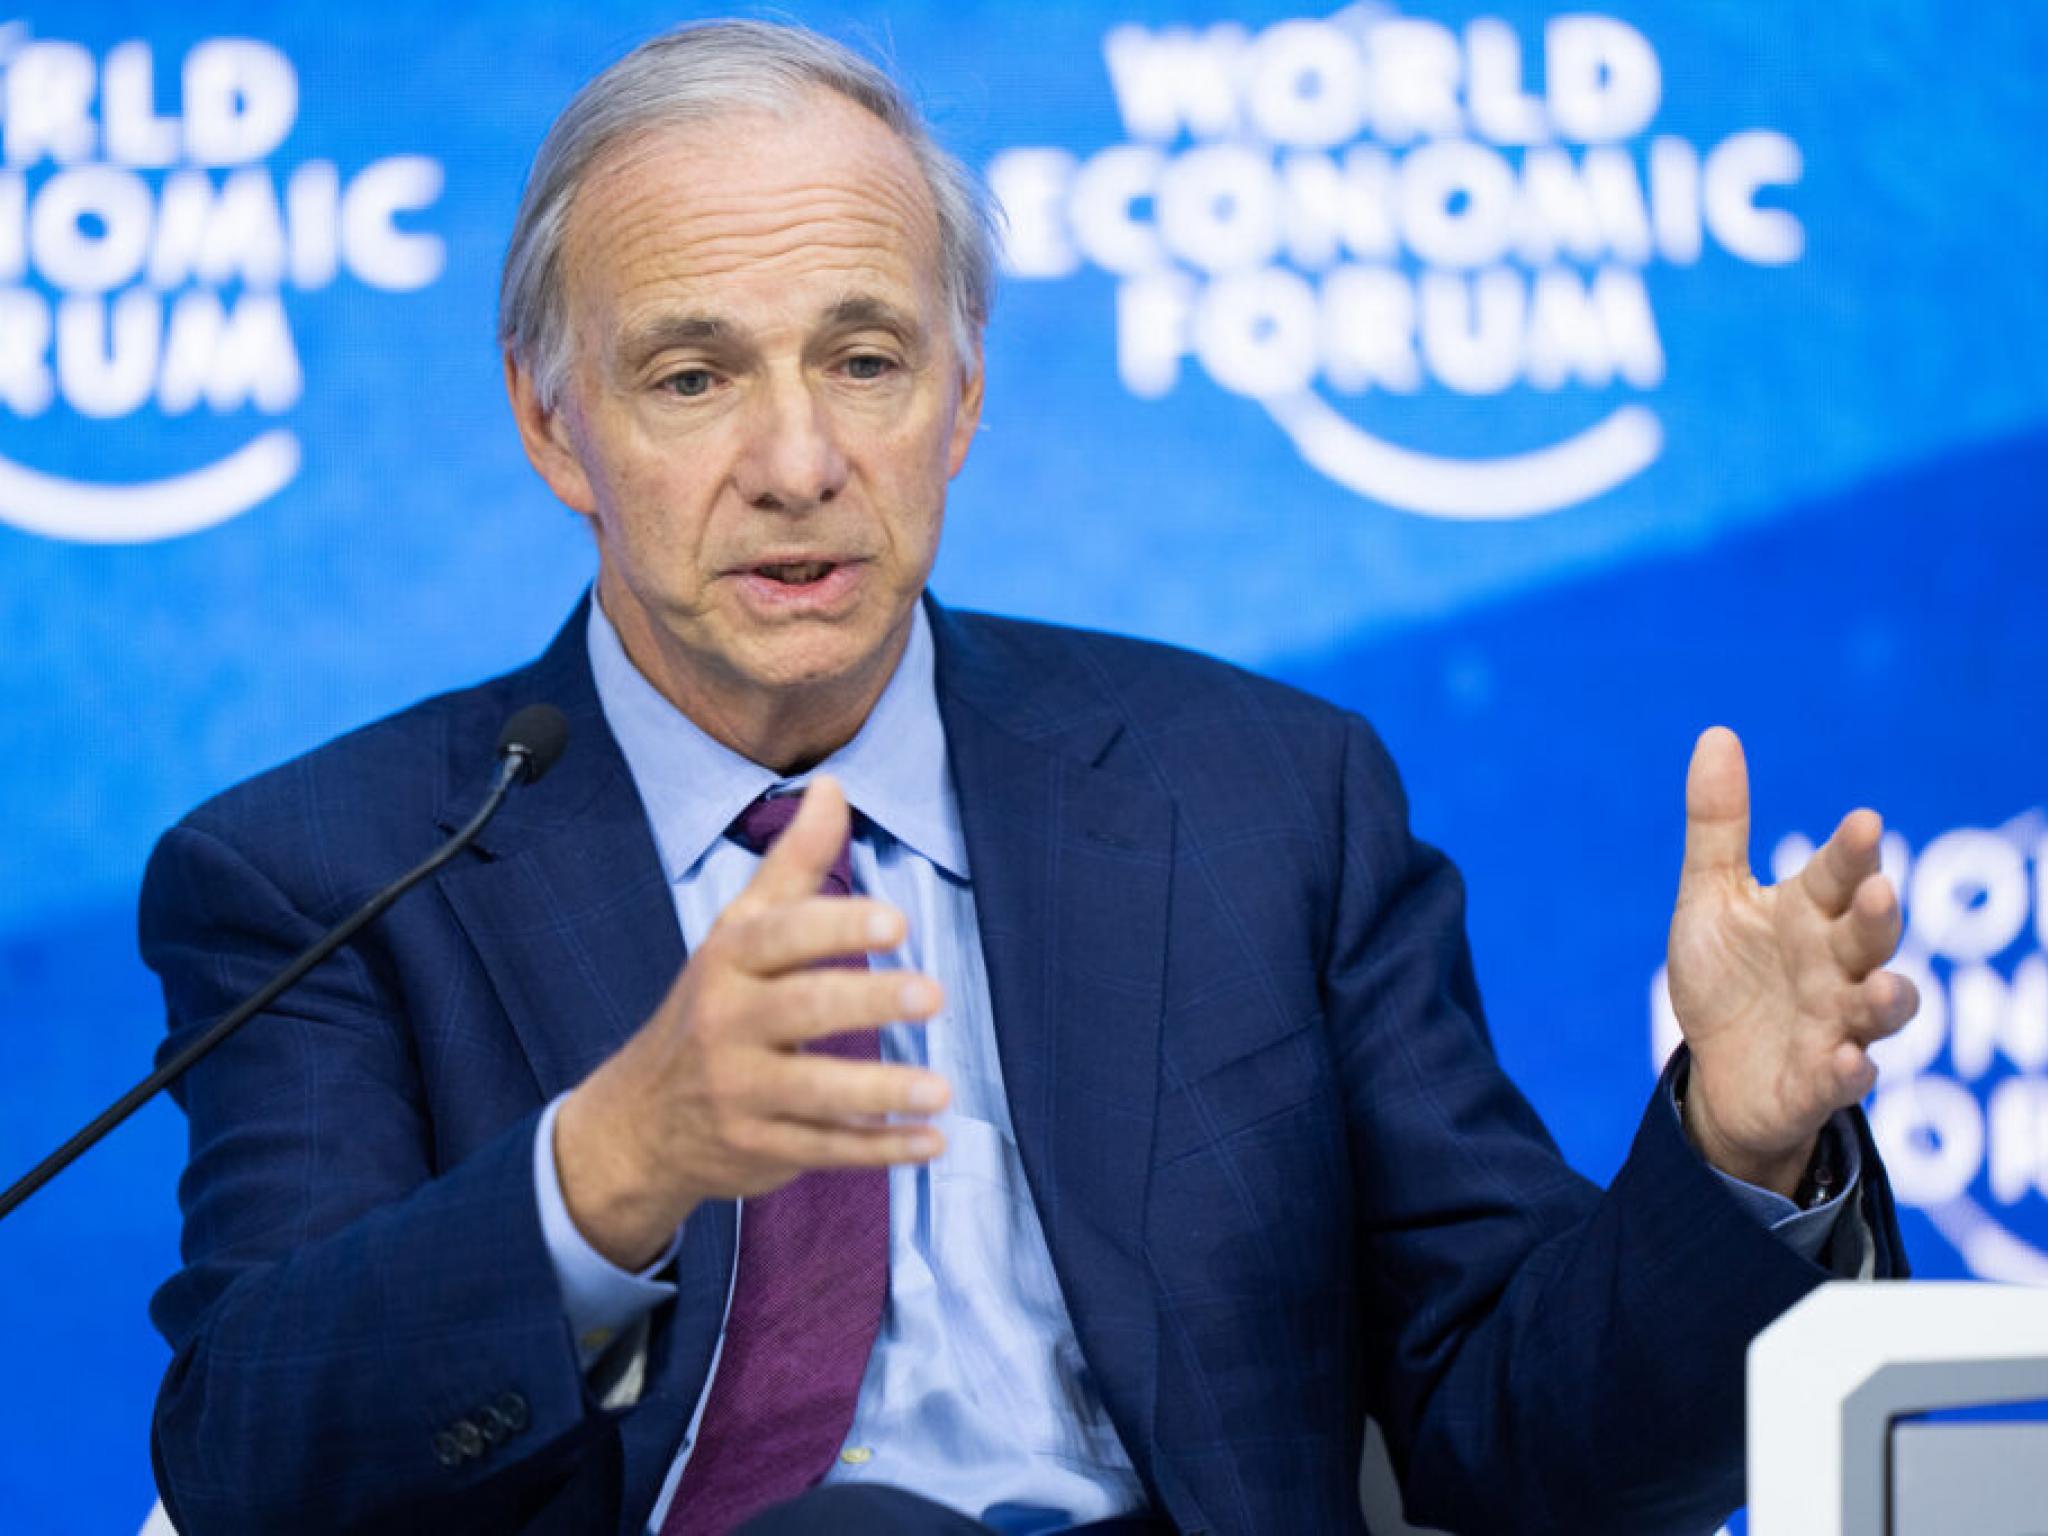  ray-dalio-gives-a-nod-to-larry-summers-contention-that-federal-reserve-in-a-treacherous-environment-should-be-very-cautious-about-possible-rate-cutting 